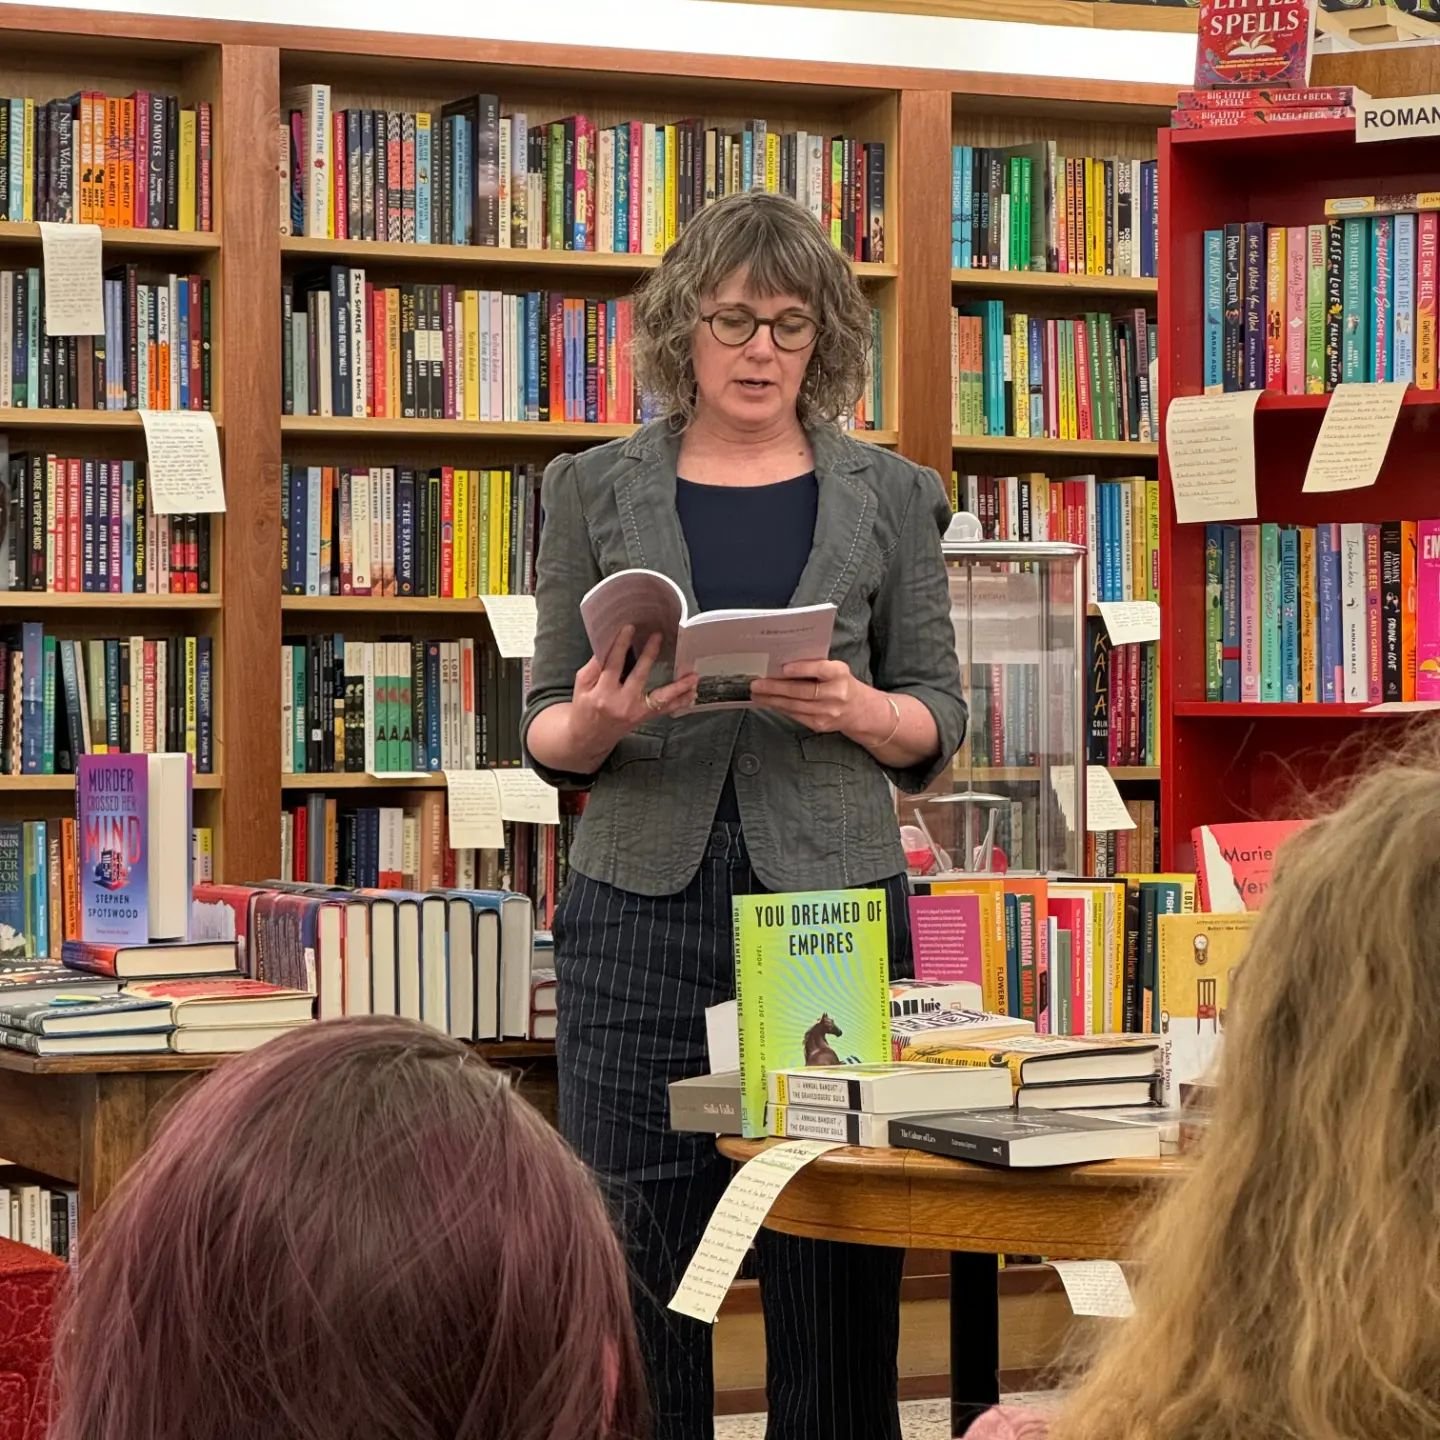 Thanks to everyone who supported our author @kellyrsamuels &amp; fellow poets Claire Wahmanholm and Sarah Green at @subtextbooks this week! If you missed it, there are still some signed copies of OBLIVESCENCE waiting for you in store on this Independ